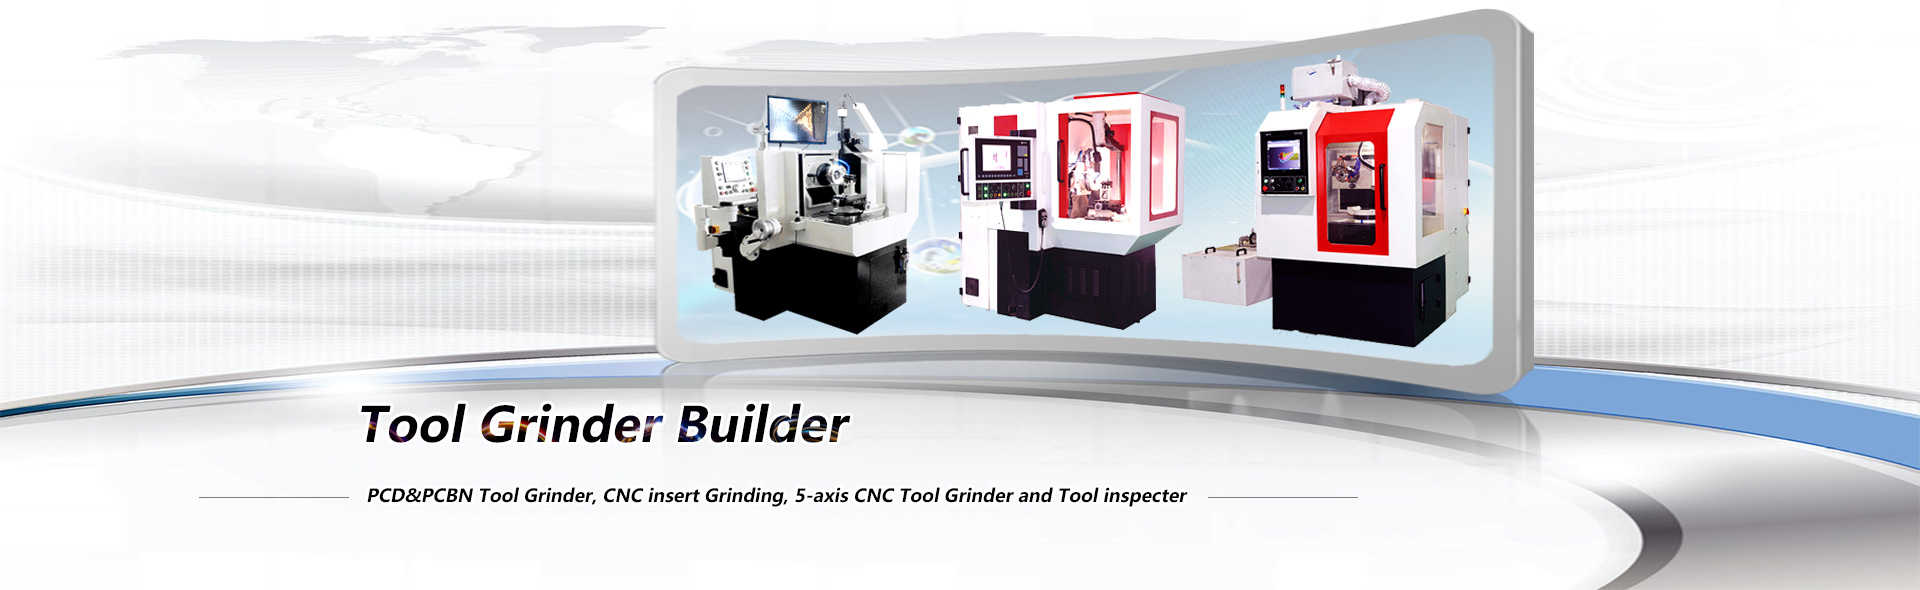 Programming And Control System (ToolMaker V2.0) For Five-Axis Tool Grinding Machine